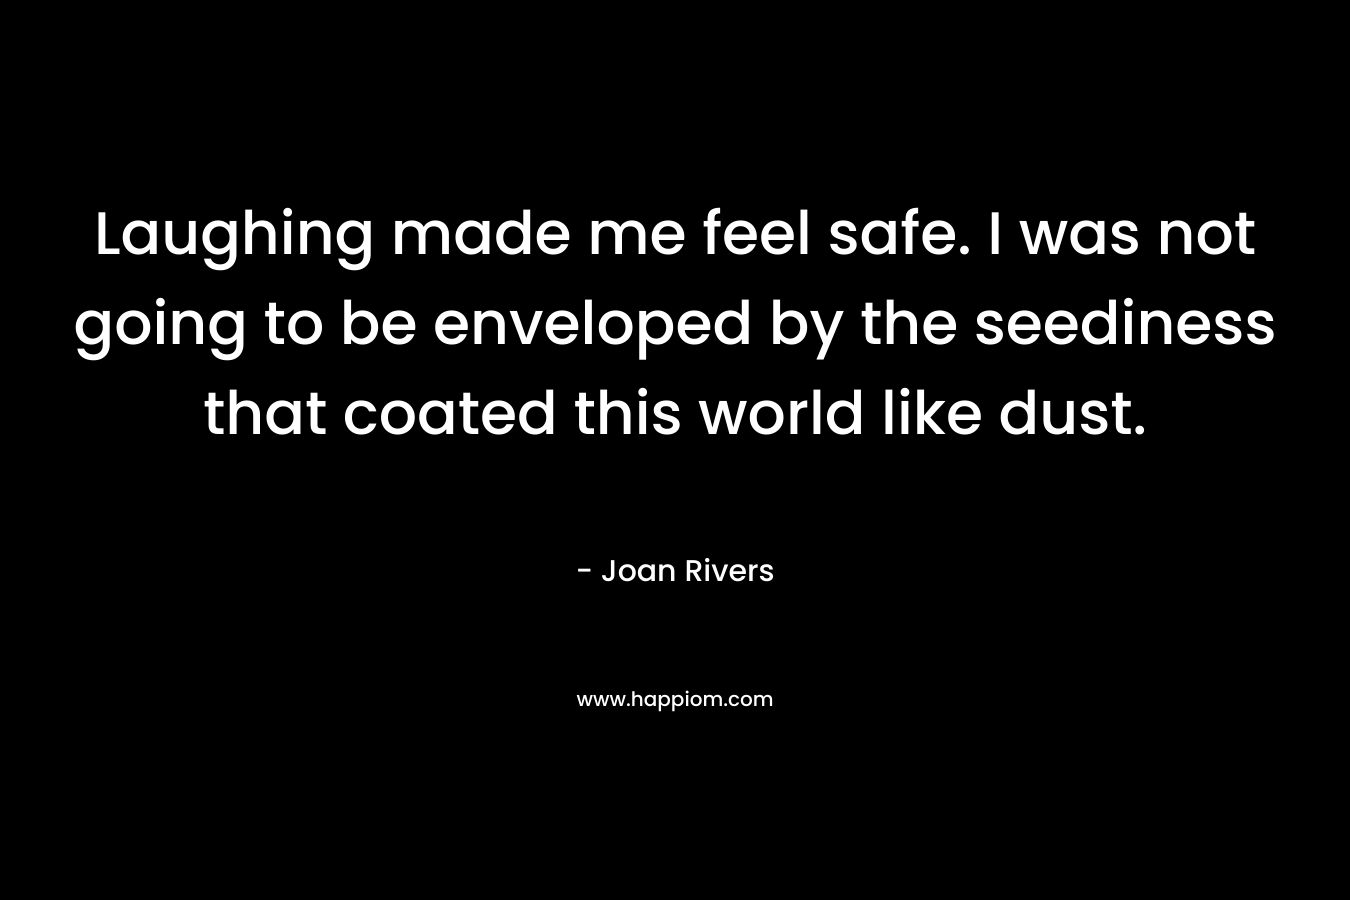 Laughing made me feel safe. I was not going to be enveloped by the seediness that coated this world like dust. – Joan Rivers